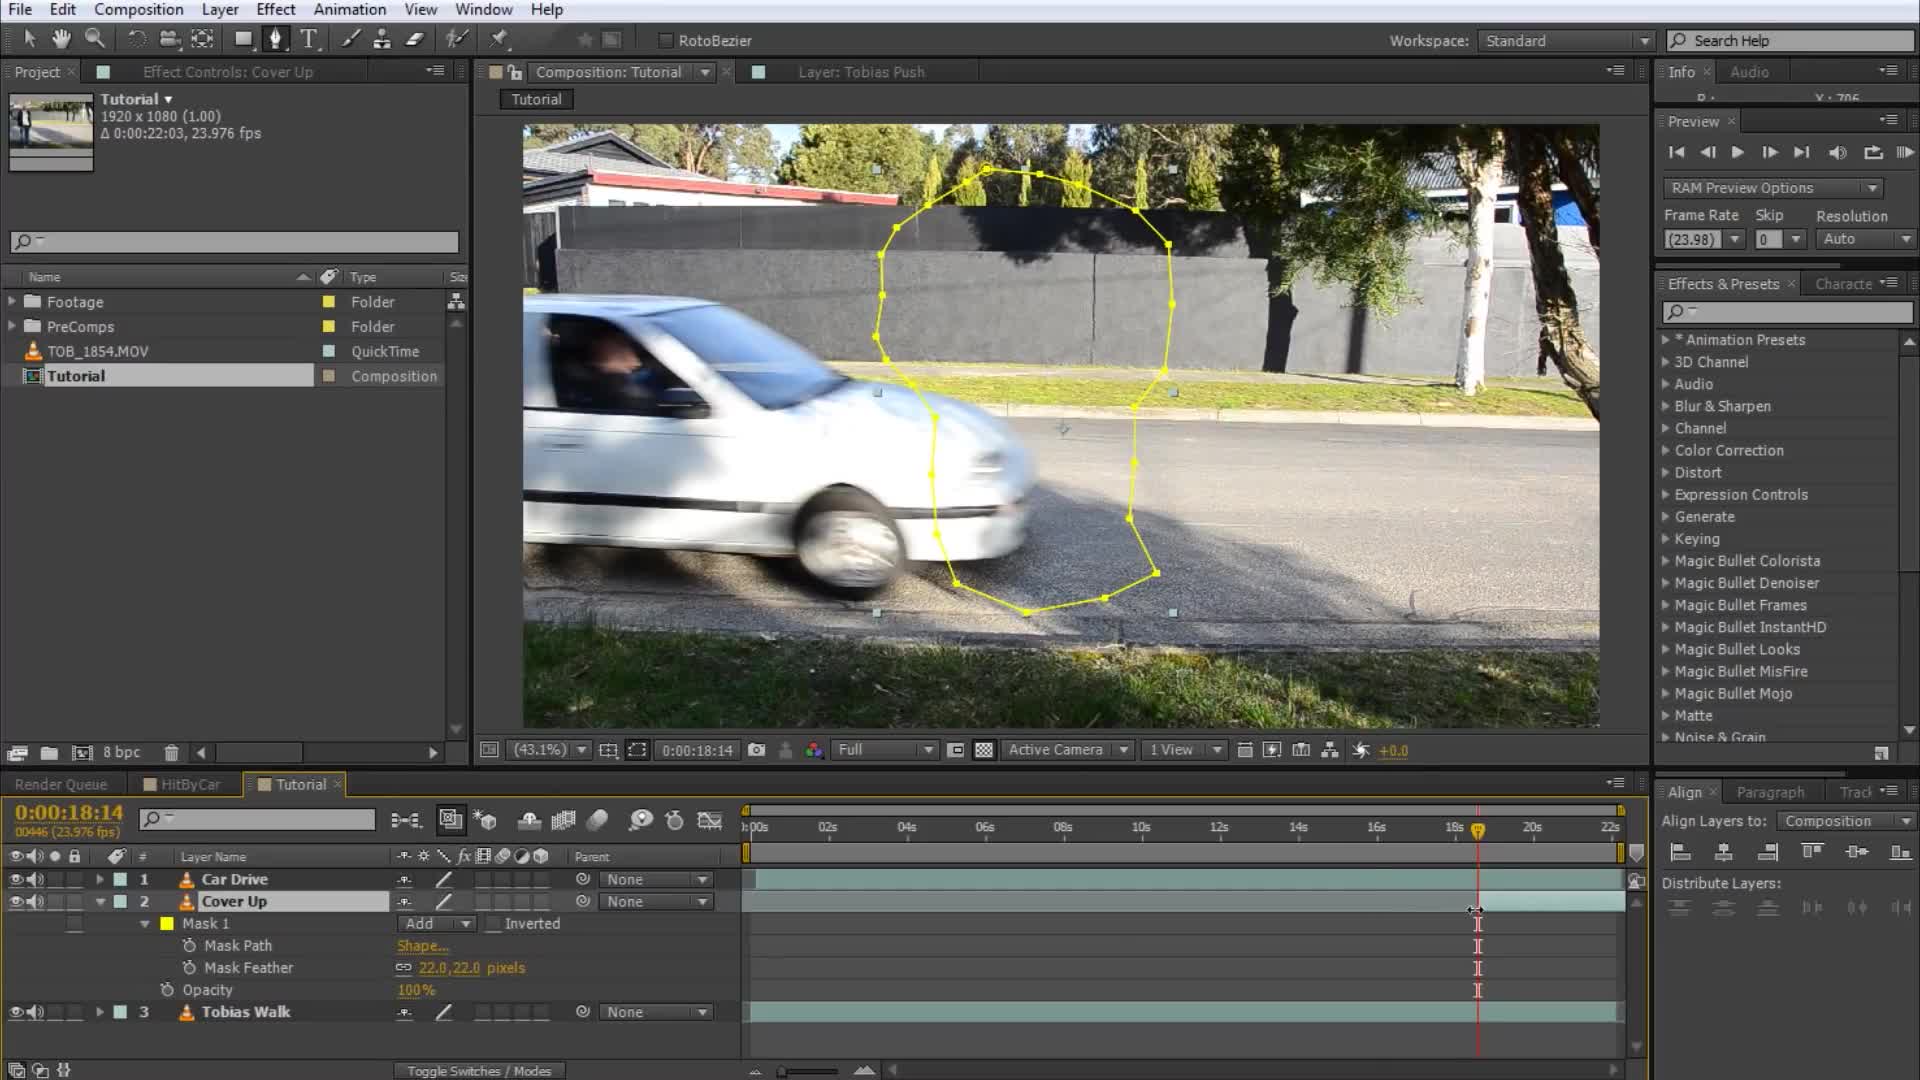 How To Get Hit By Car - Adobe After Effects Visual Effects Tutorial